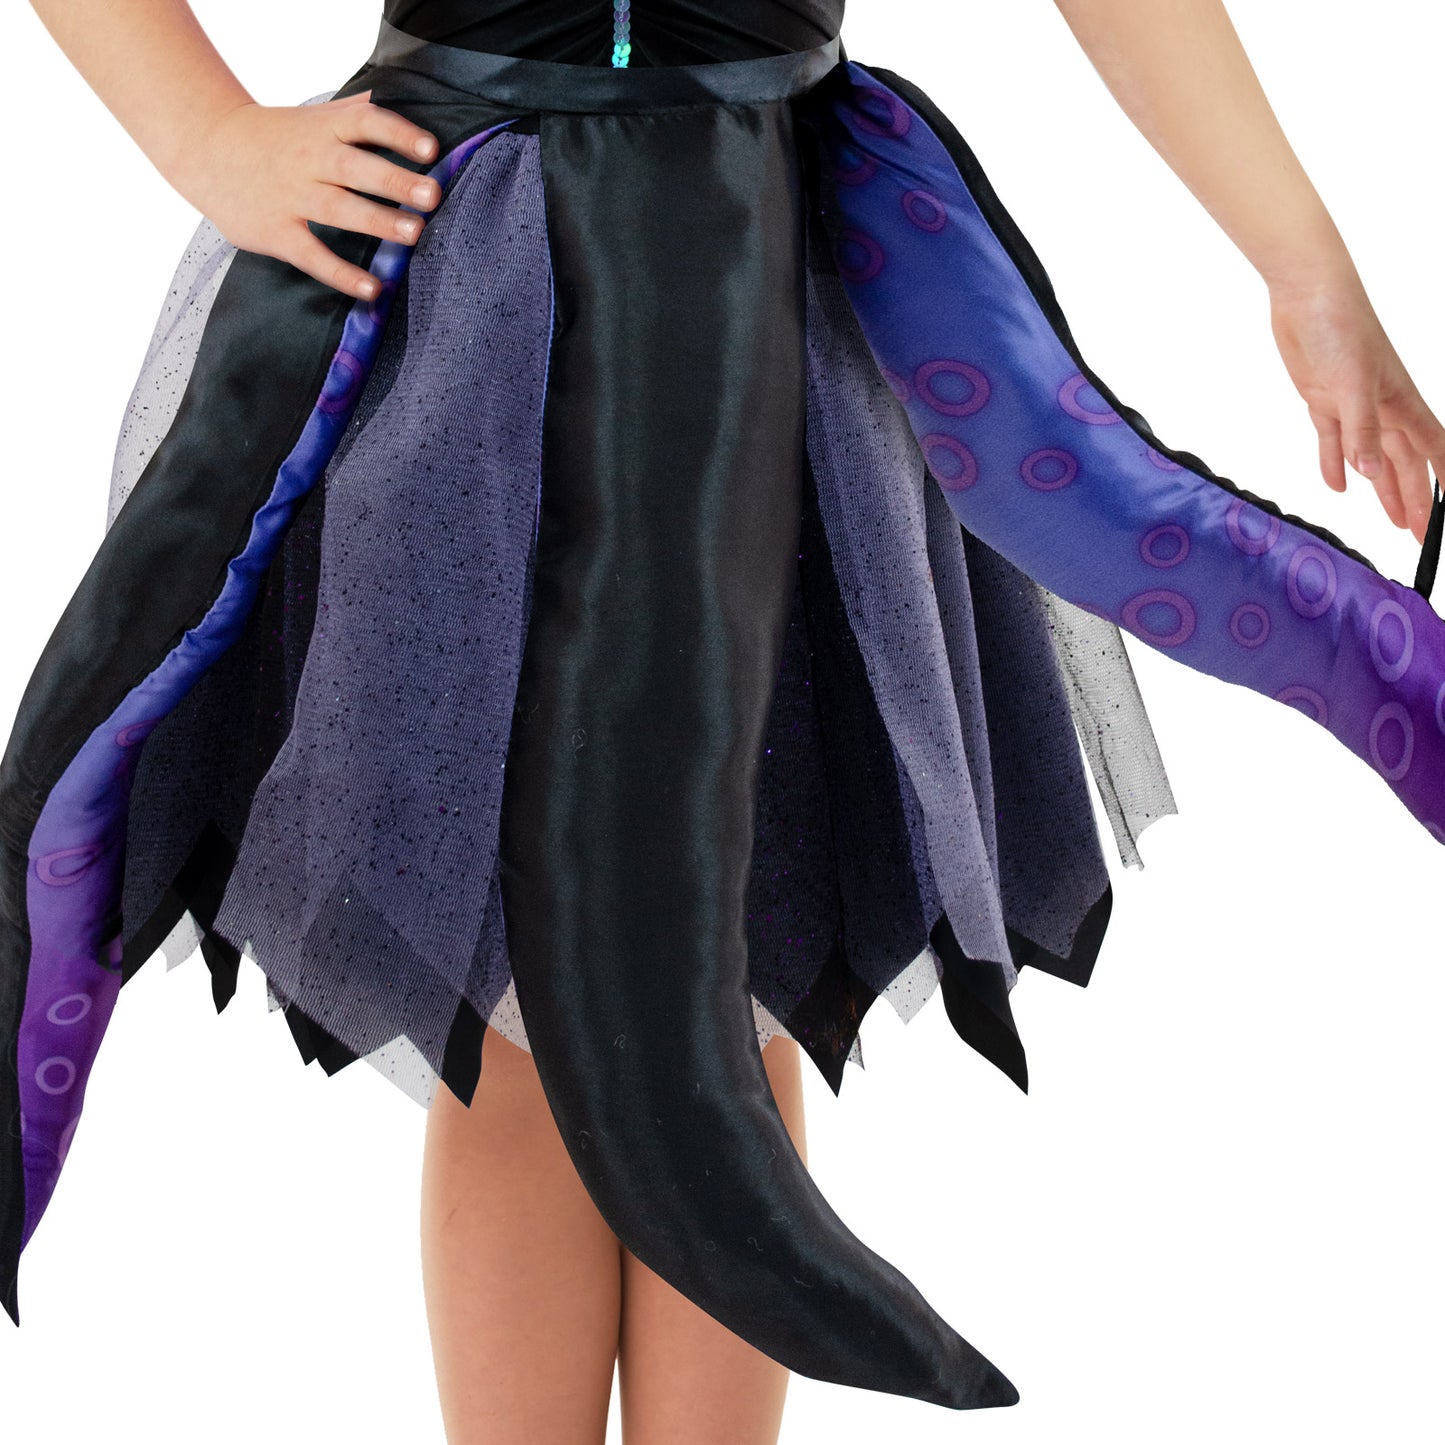 Ursula Sea Withc Little Mermaid Child Girls Deluxe Costume - Licensed